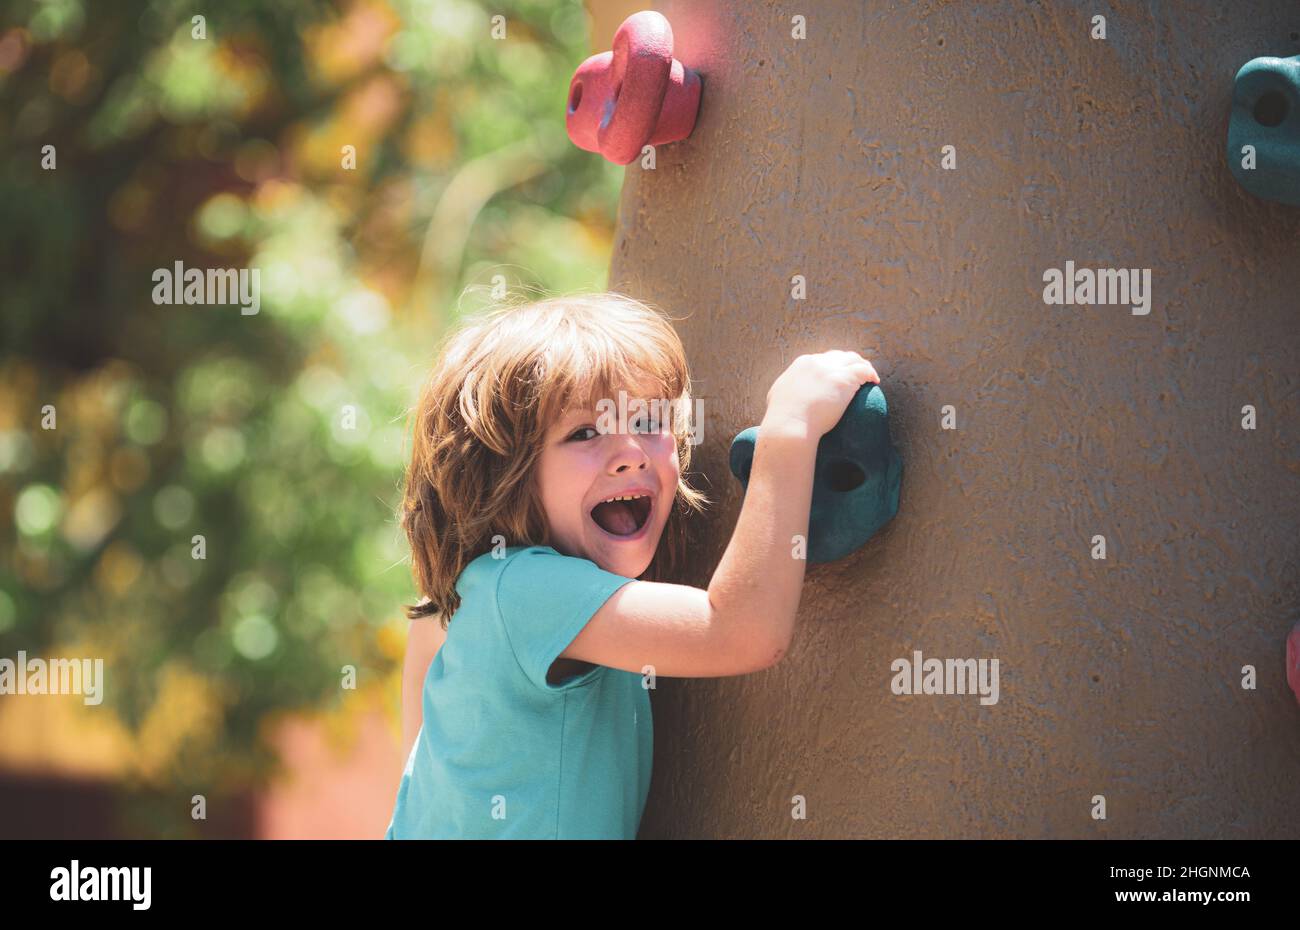 Insurance kids. Portrait of kid boy climbing on practical wall indoor, bouldering training. Health care insurance concept for family and children Stock Photo